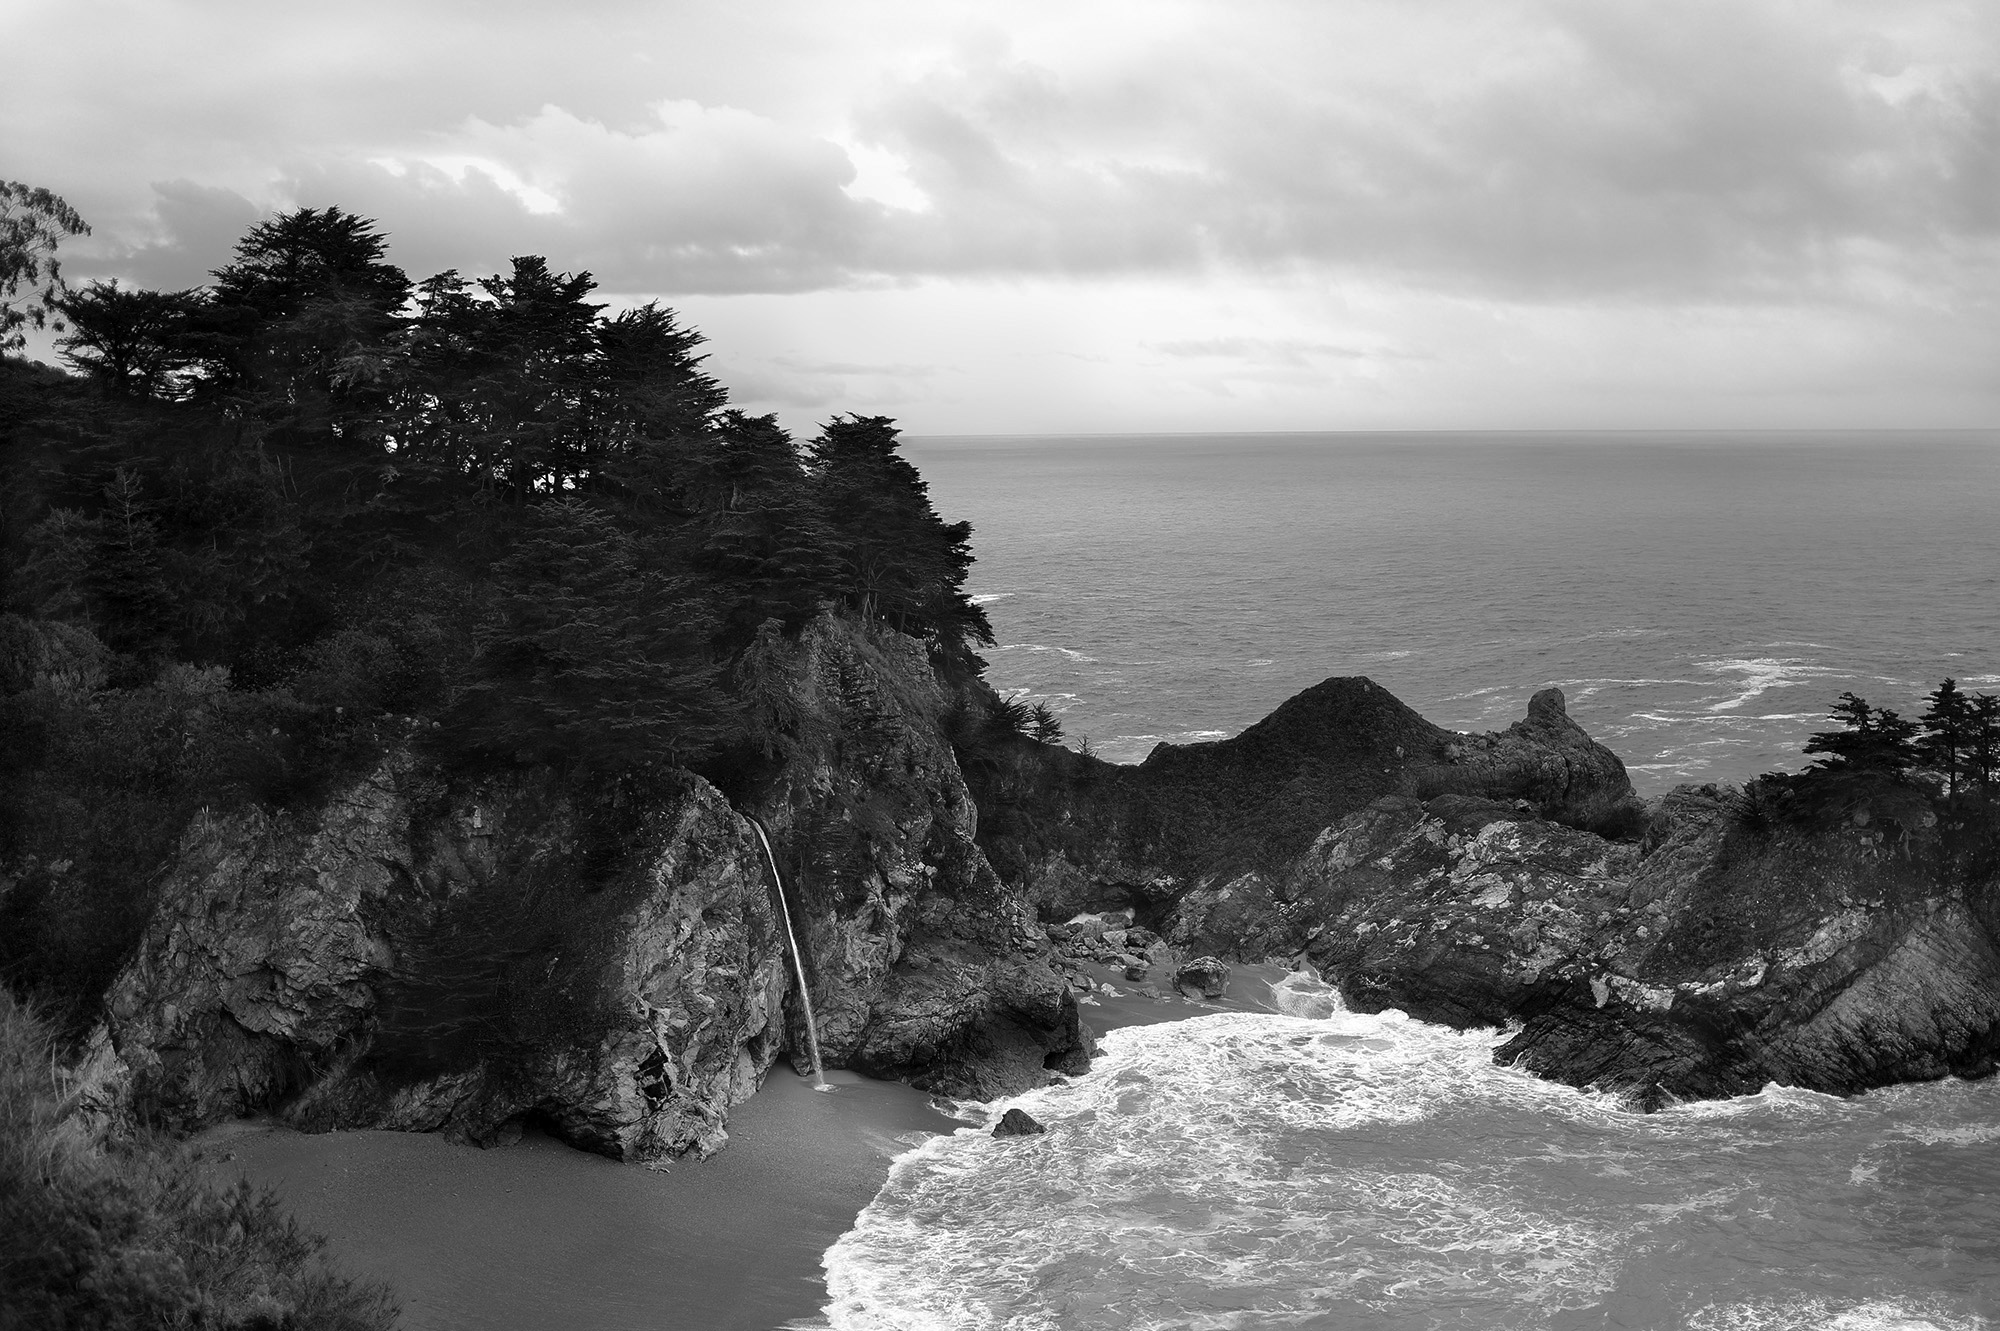 Big Sur Morning in Black and White by Rich J. Velasco